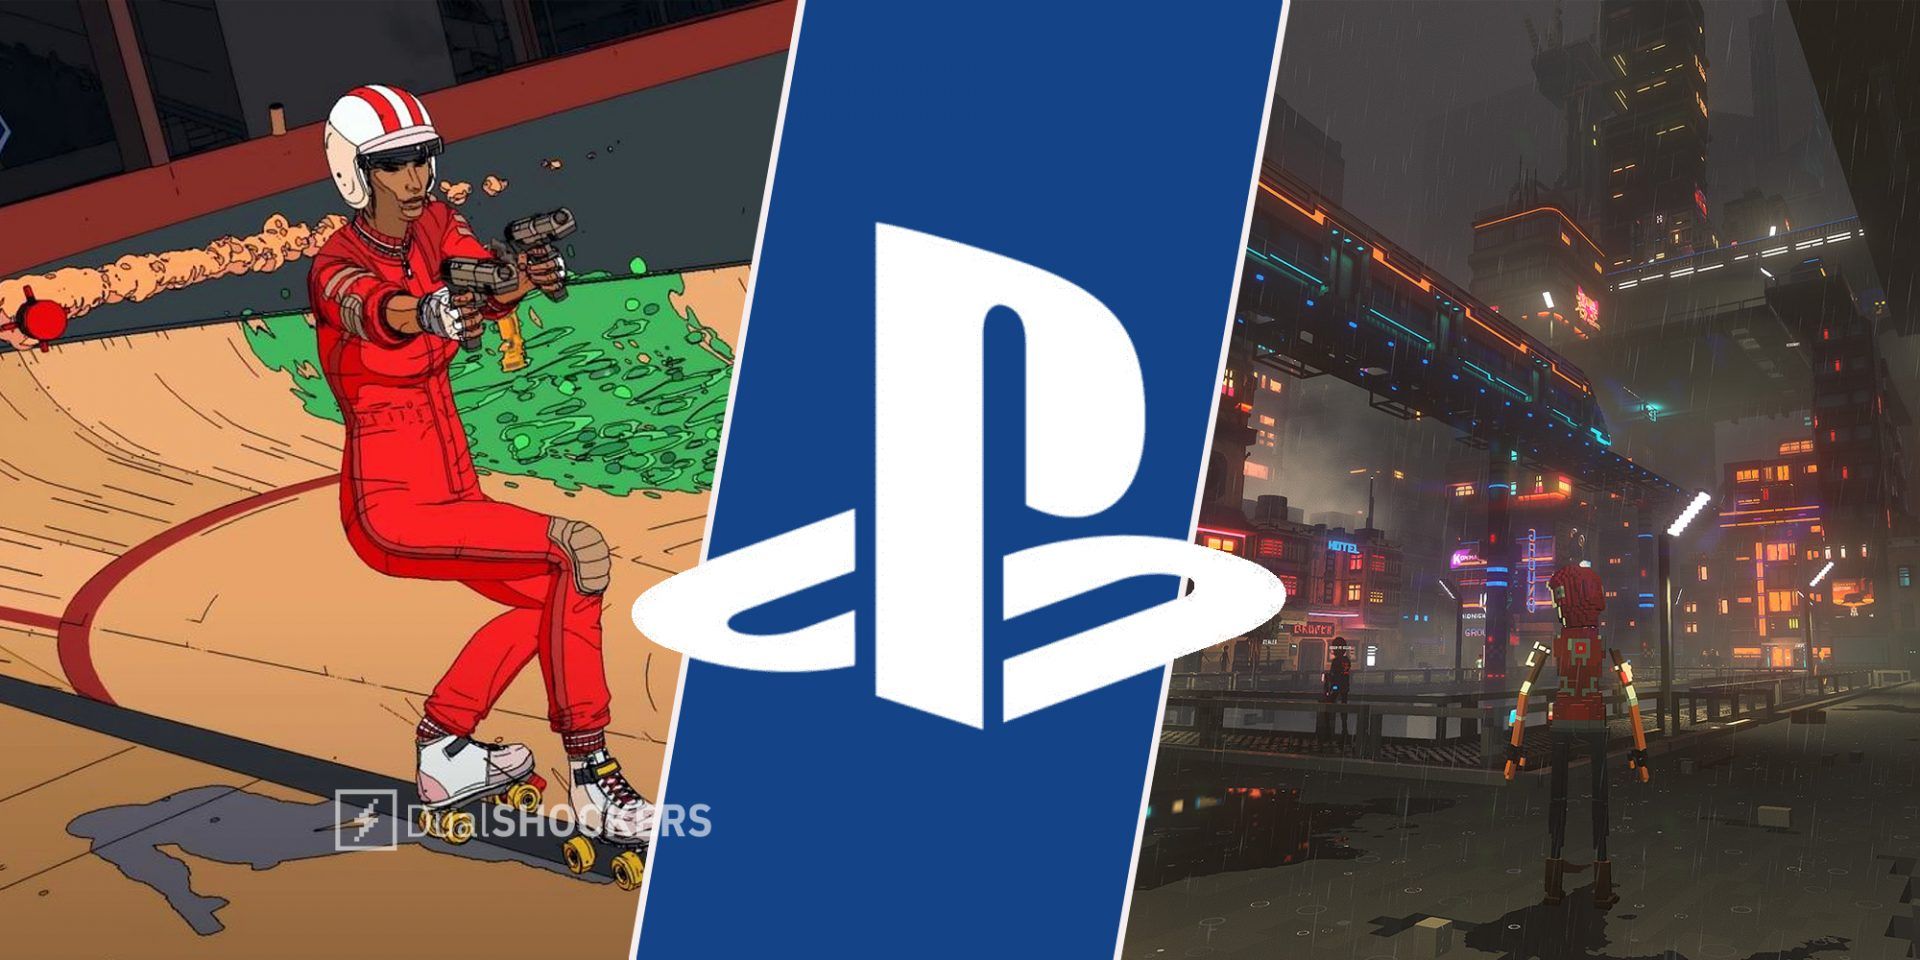 Playstation games Rollerdrome on left, Playstation logo in middle, Cloudpunk on right